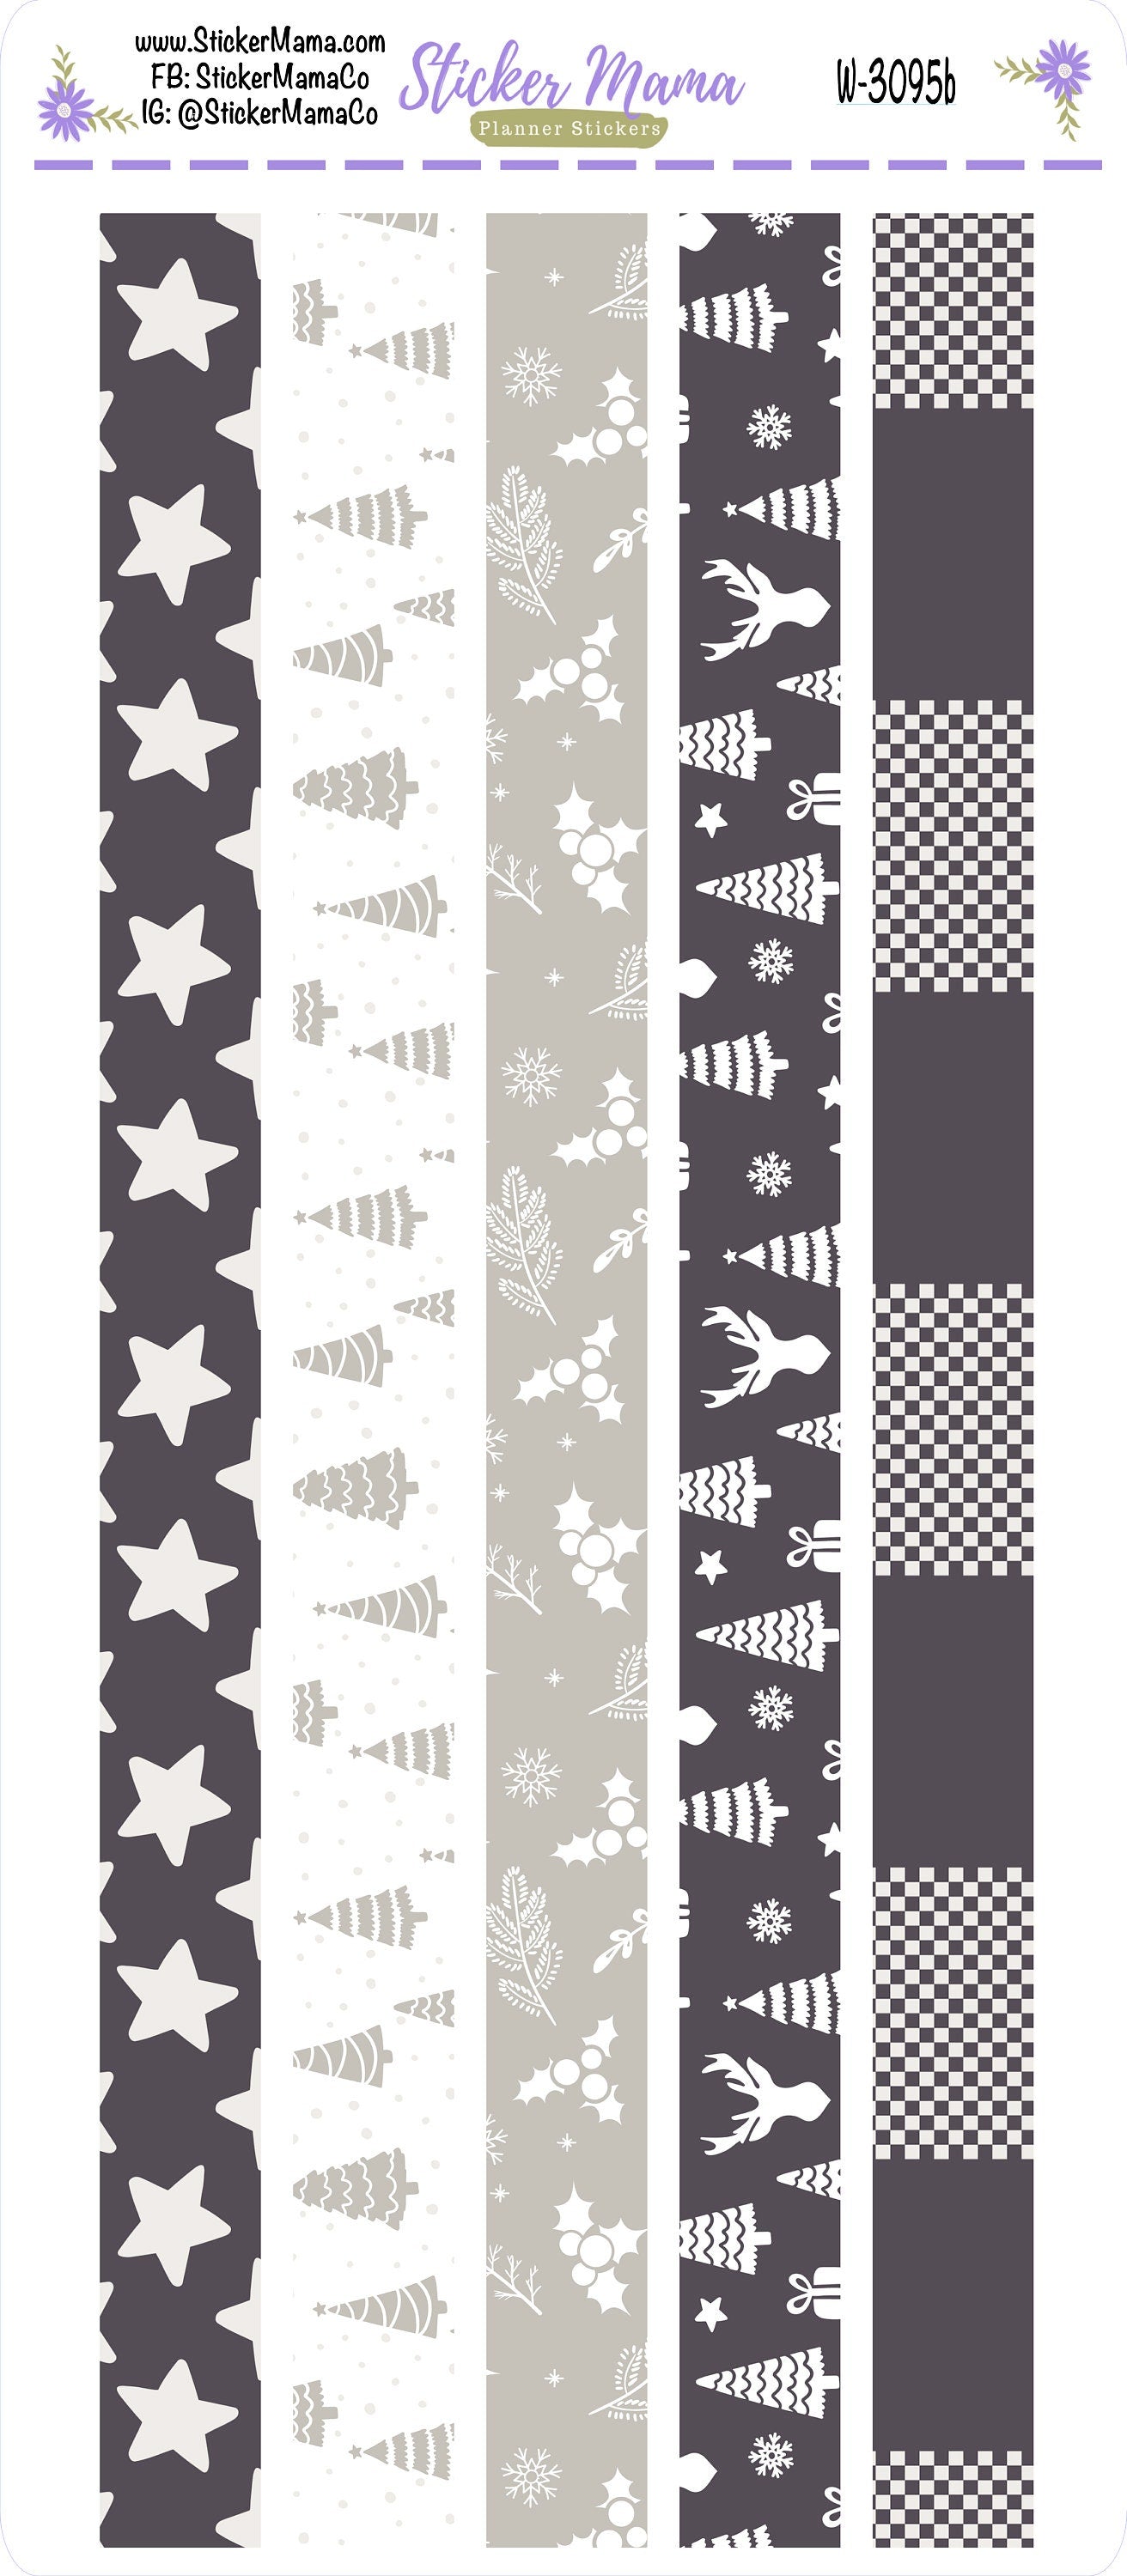 W-3095- WINTER GREY || Washi Stickers || Planner Stickers || Washi for Planners